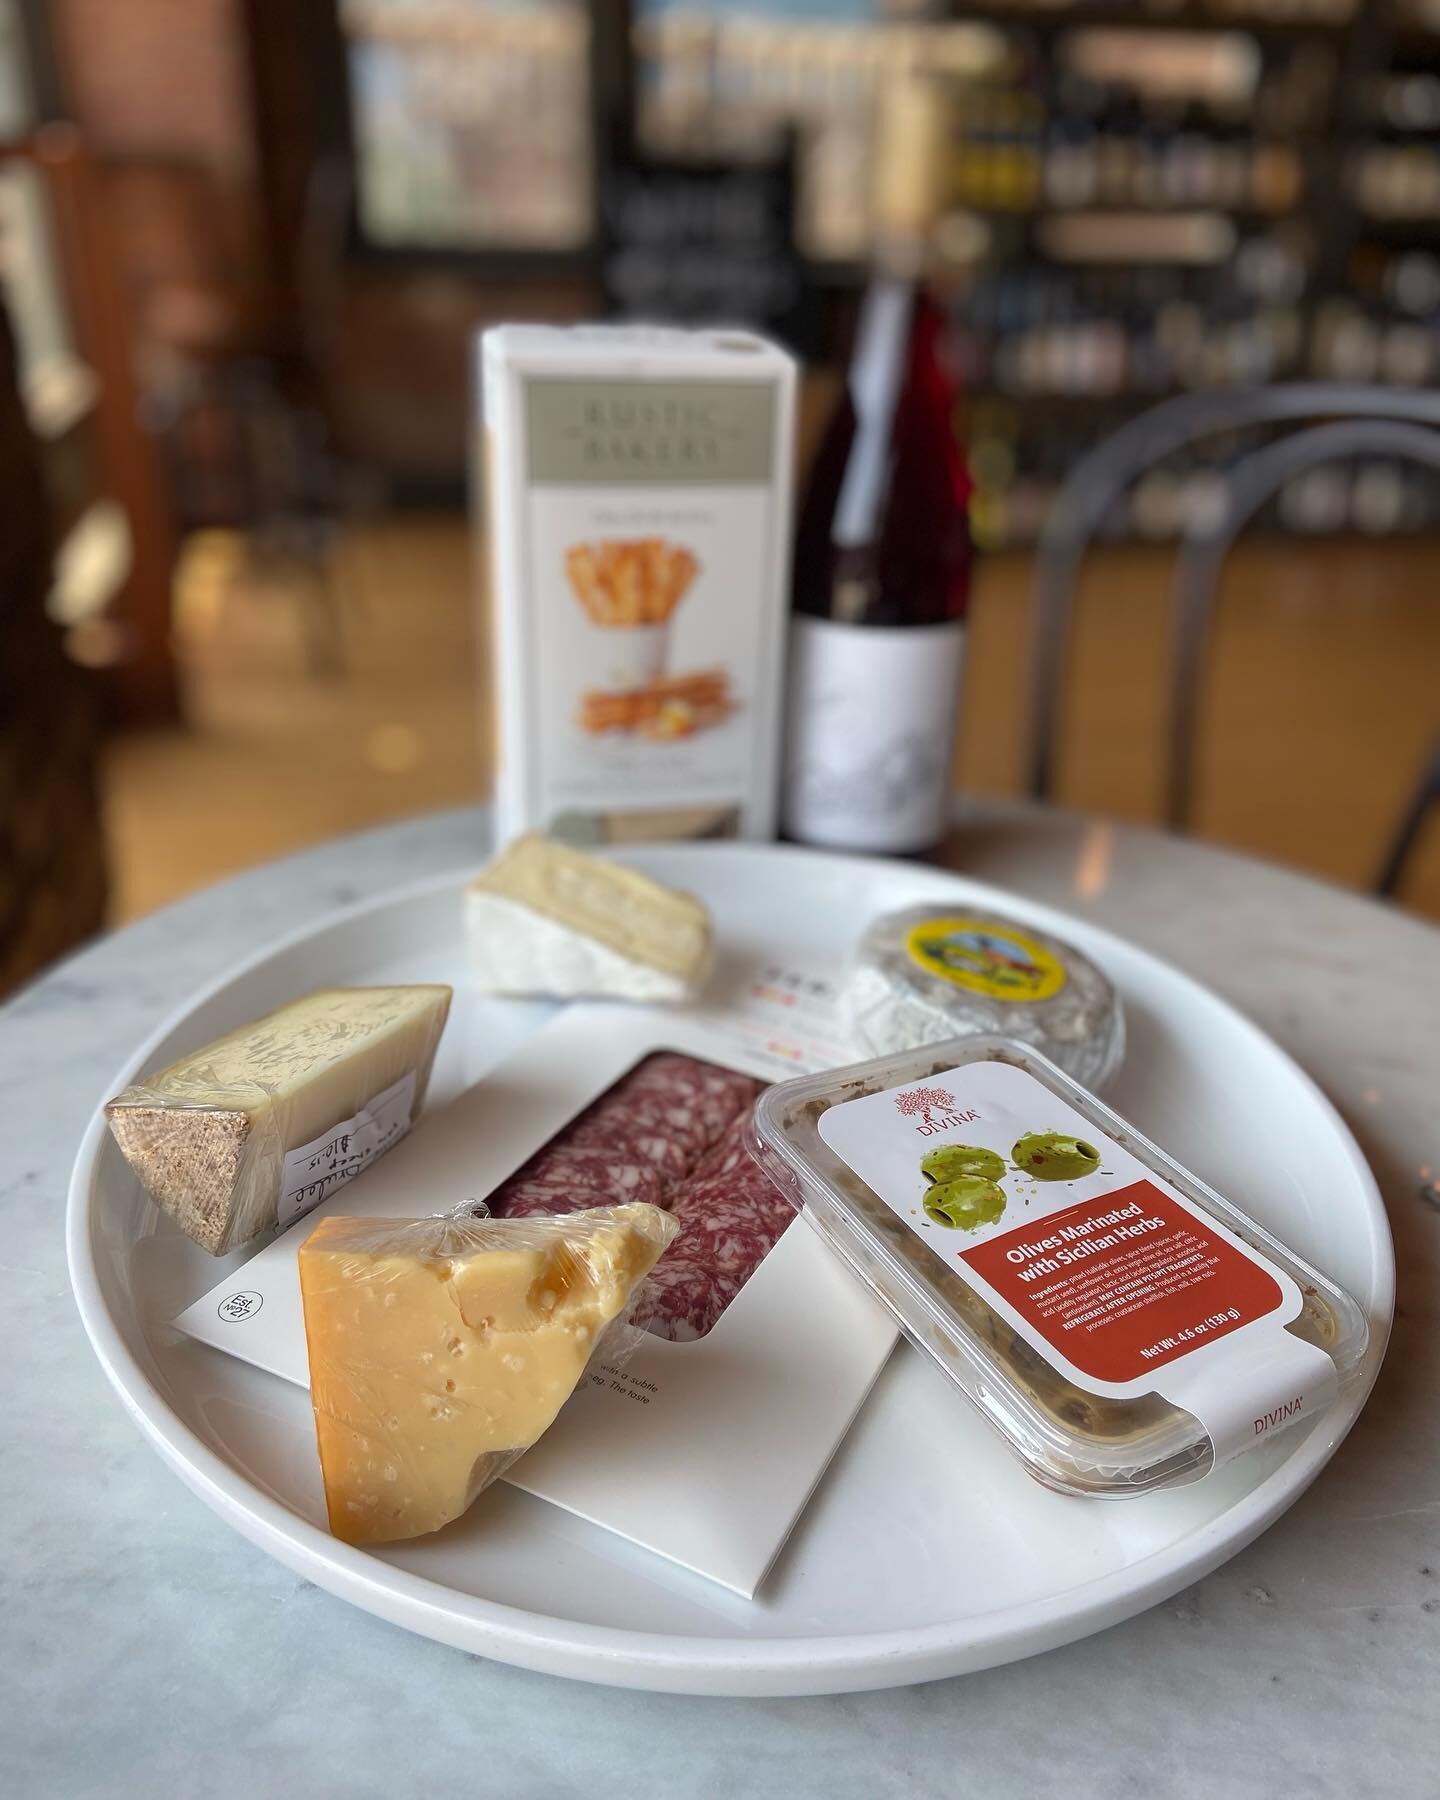 Channeling your dinner vibes&hellip;when you pick up your next bottle of wine make sure to check out our new selection of cheese and meats! #gistdoit #gistwineshop #gistwine #gistcheese #gistmeats #charcuterie #charcuterieboard #wine #pairing #nocook